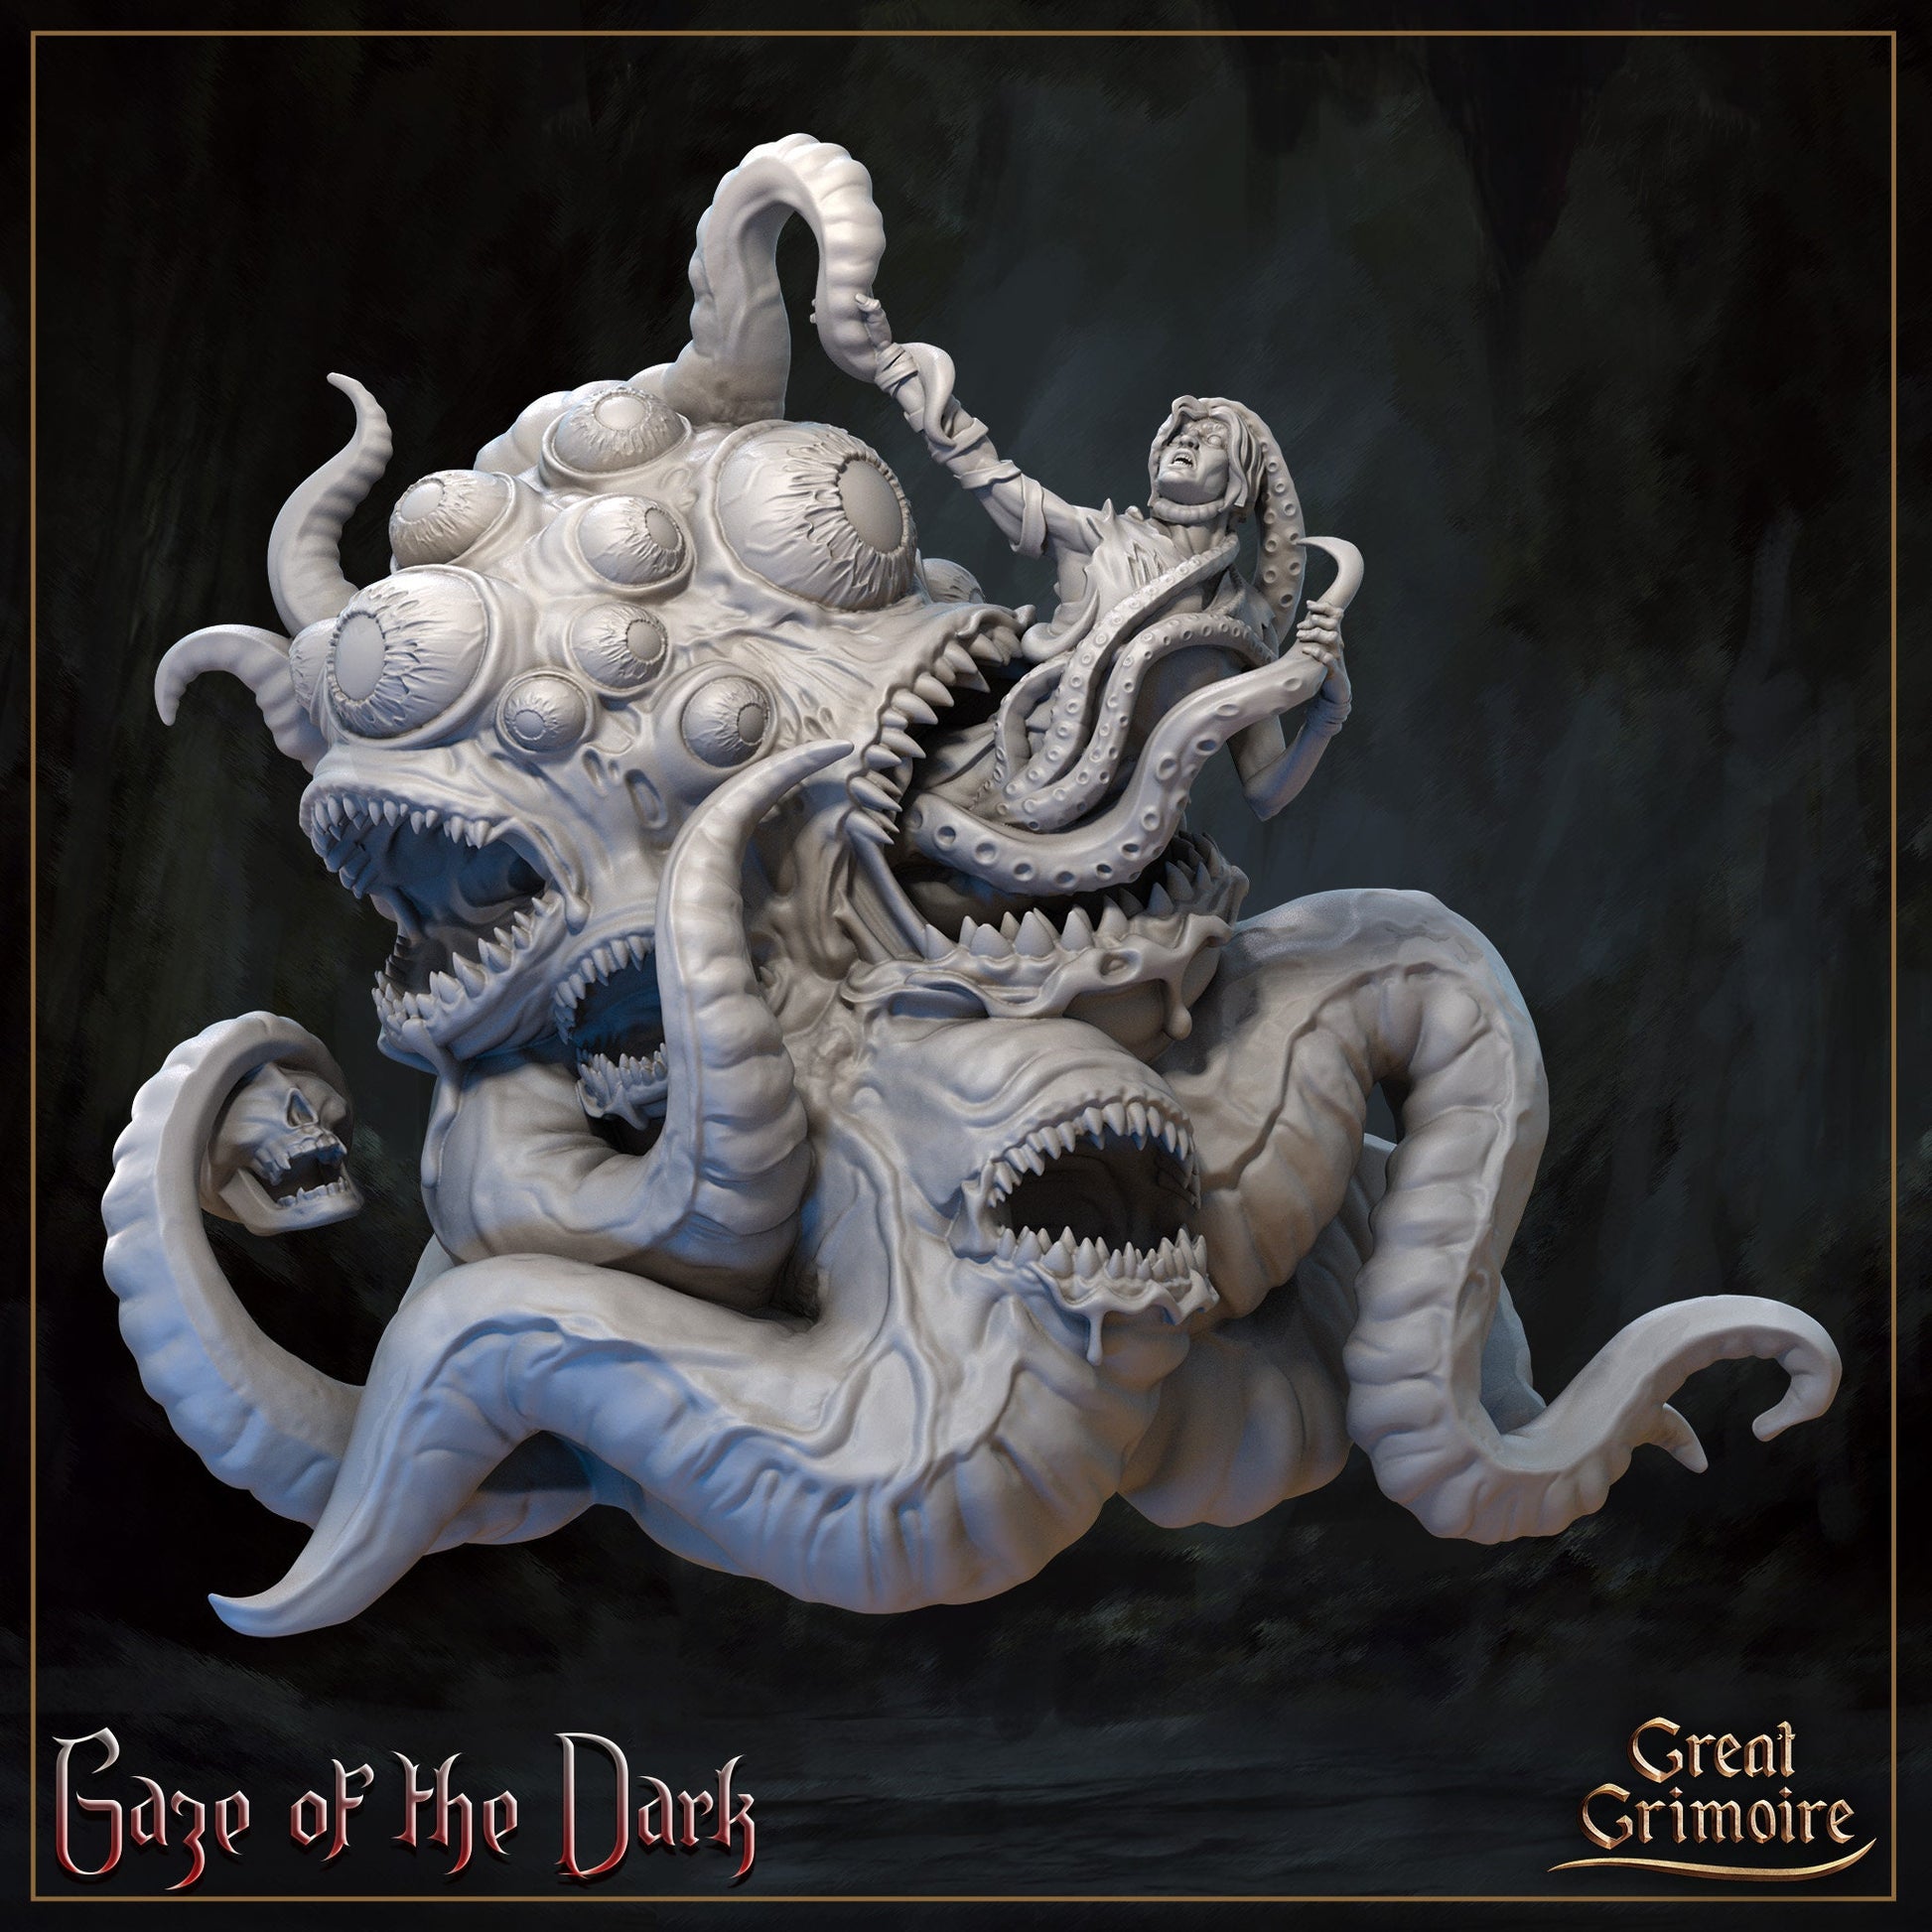 Gaze of the Dark Fully Painted - Great Grimoire Printed Miniature | Dungeons & Dragons | Pathfinder | Tabletop